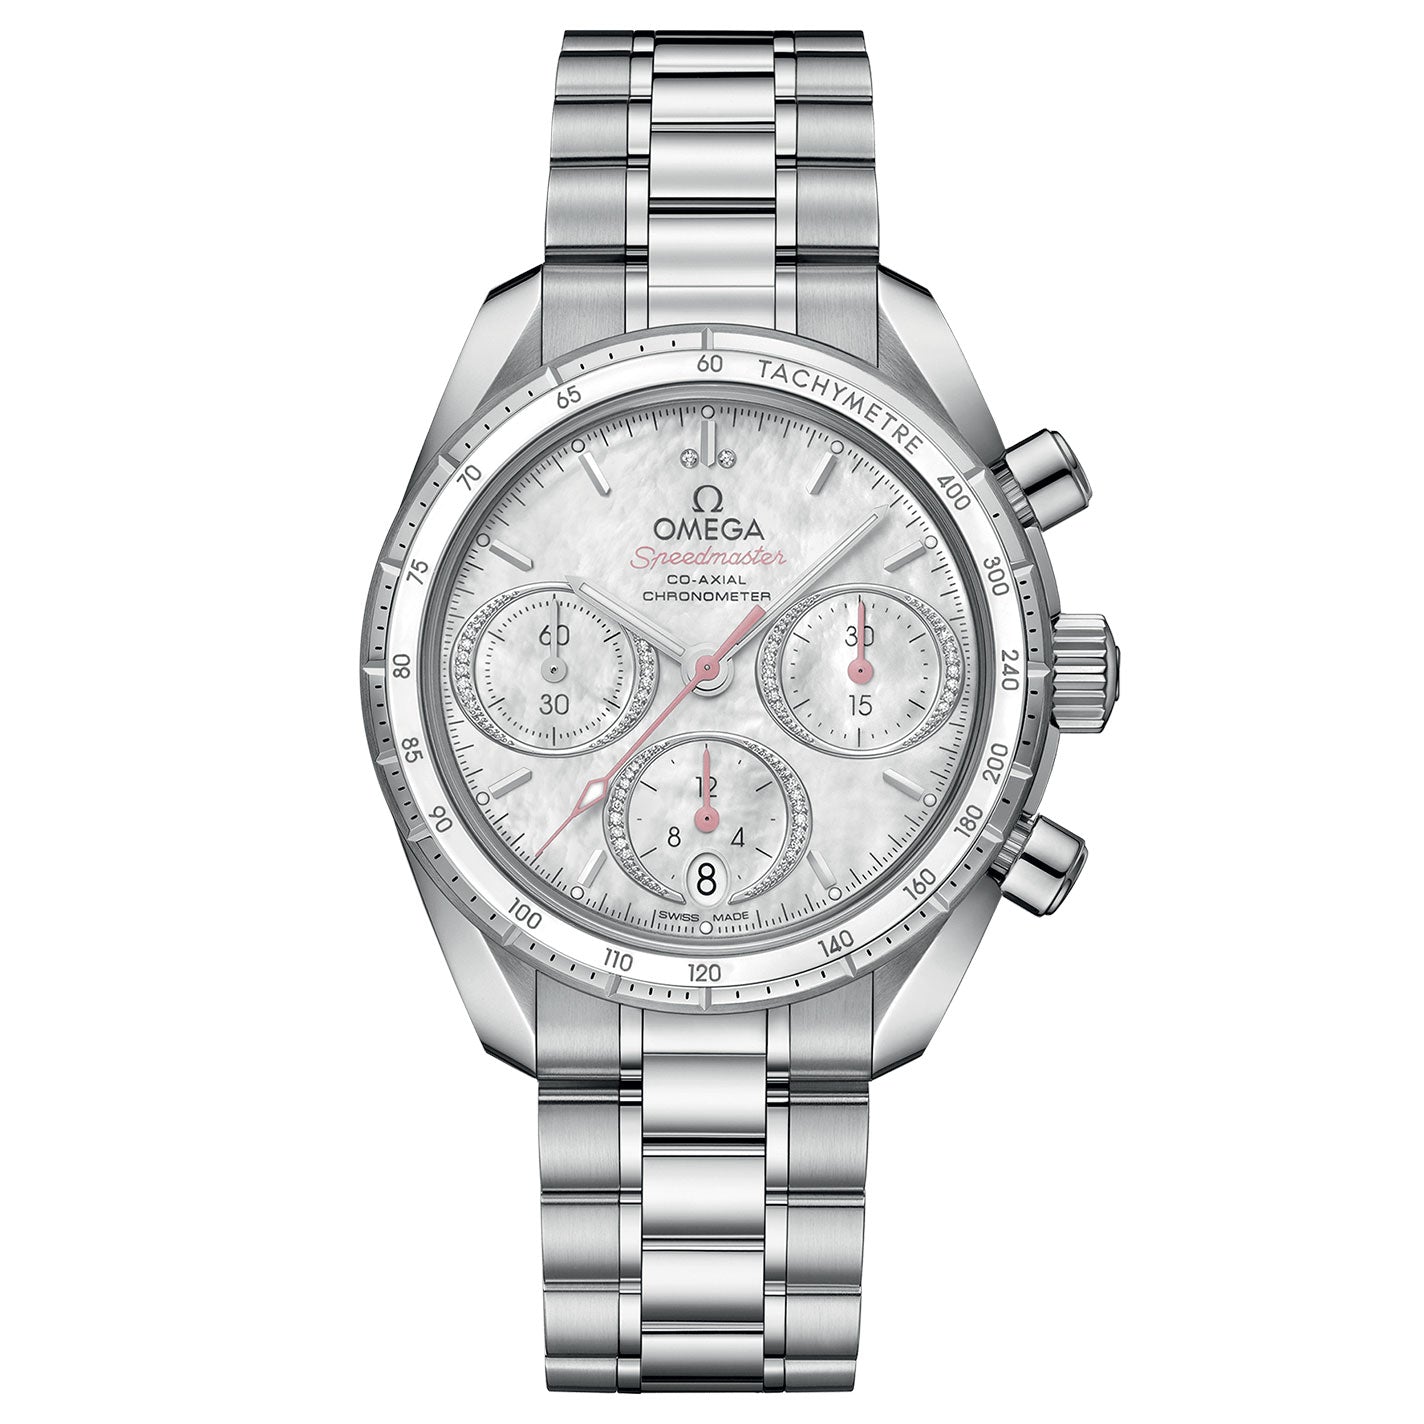 OMEGA Speedmaster 38 Co-Axial Chronometer Chronograph 38mm Watch